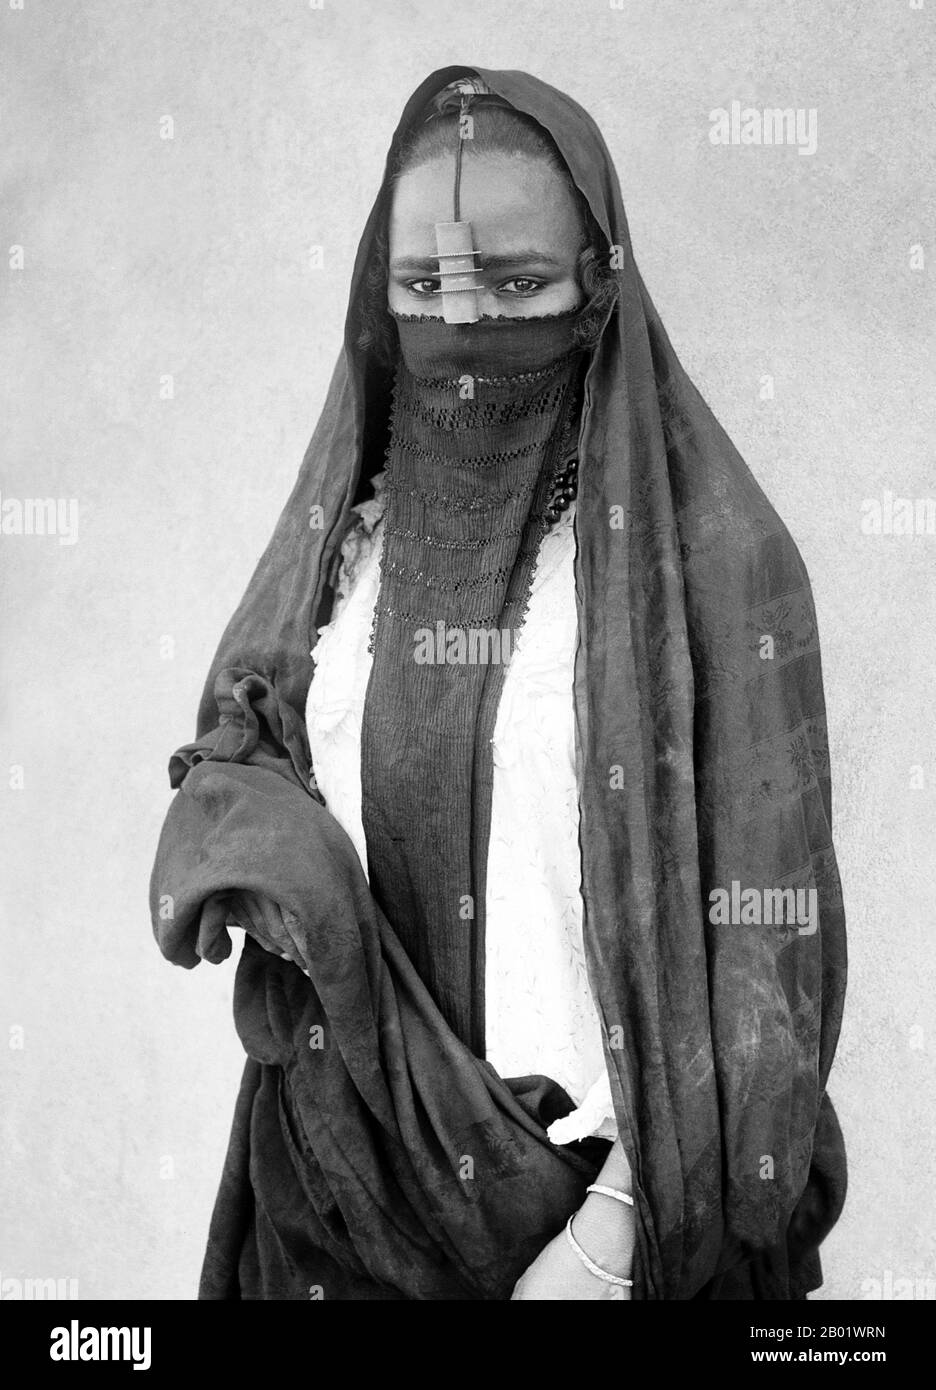 Egypt: A native veiled woman, Cairo, c. 1860-1890.  Egyptian culture has six thousand years of recorded history. Ancient Egypt was among the earliest civilisations and for millennia, Egypt maintained a strikingly complex and stable culture that influenced later cultures of Europe, the Middle East and other African countries.  After the Pharaonic era, Egypt itself came under the influence of Hellenism, Christianity and Islamic culture. Today, many aspects of Egypt's ancient culture exist in interaction with newer elements, including the influence of modern Western culture. Stock Photo